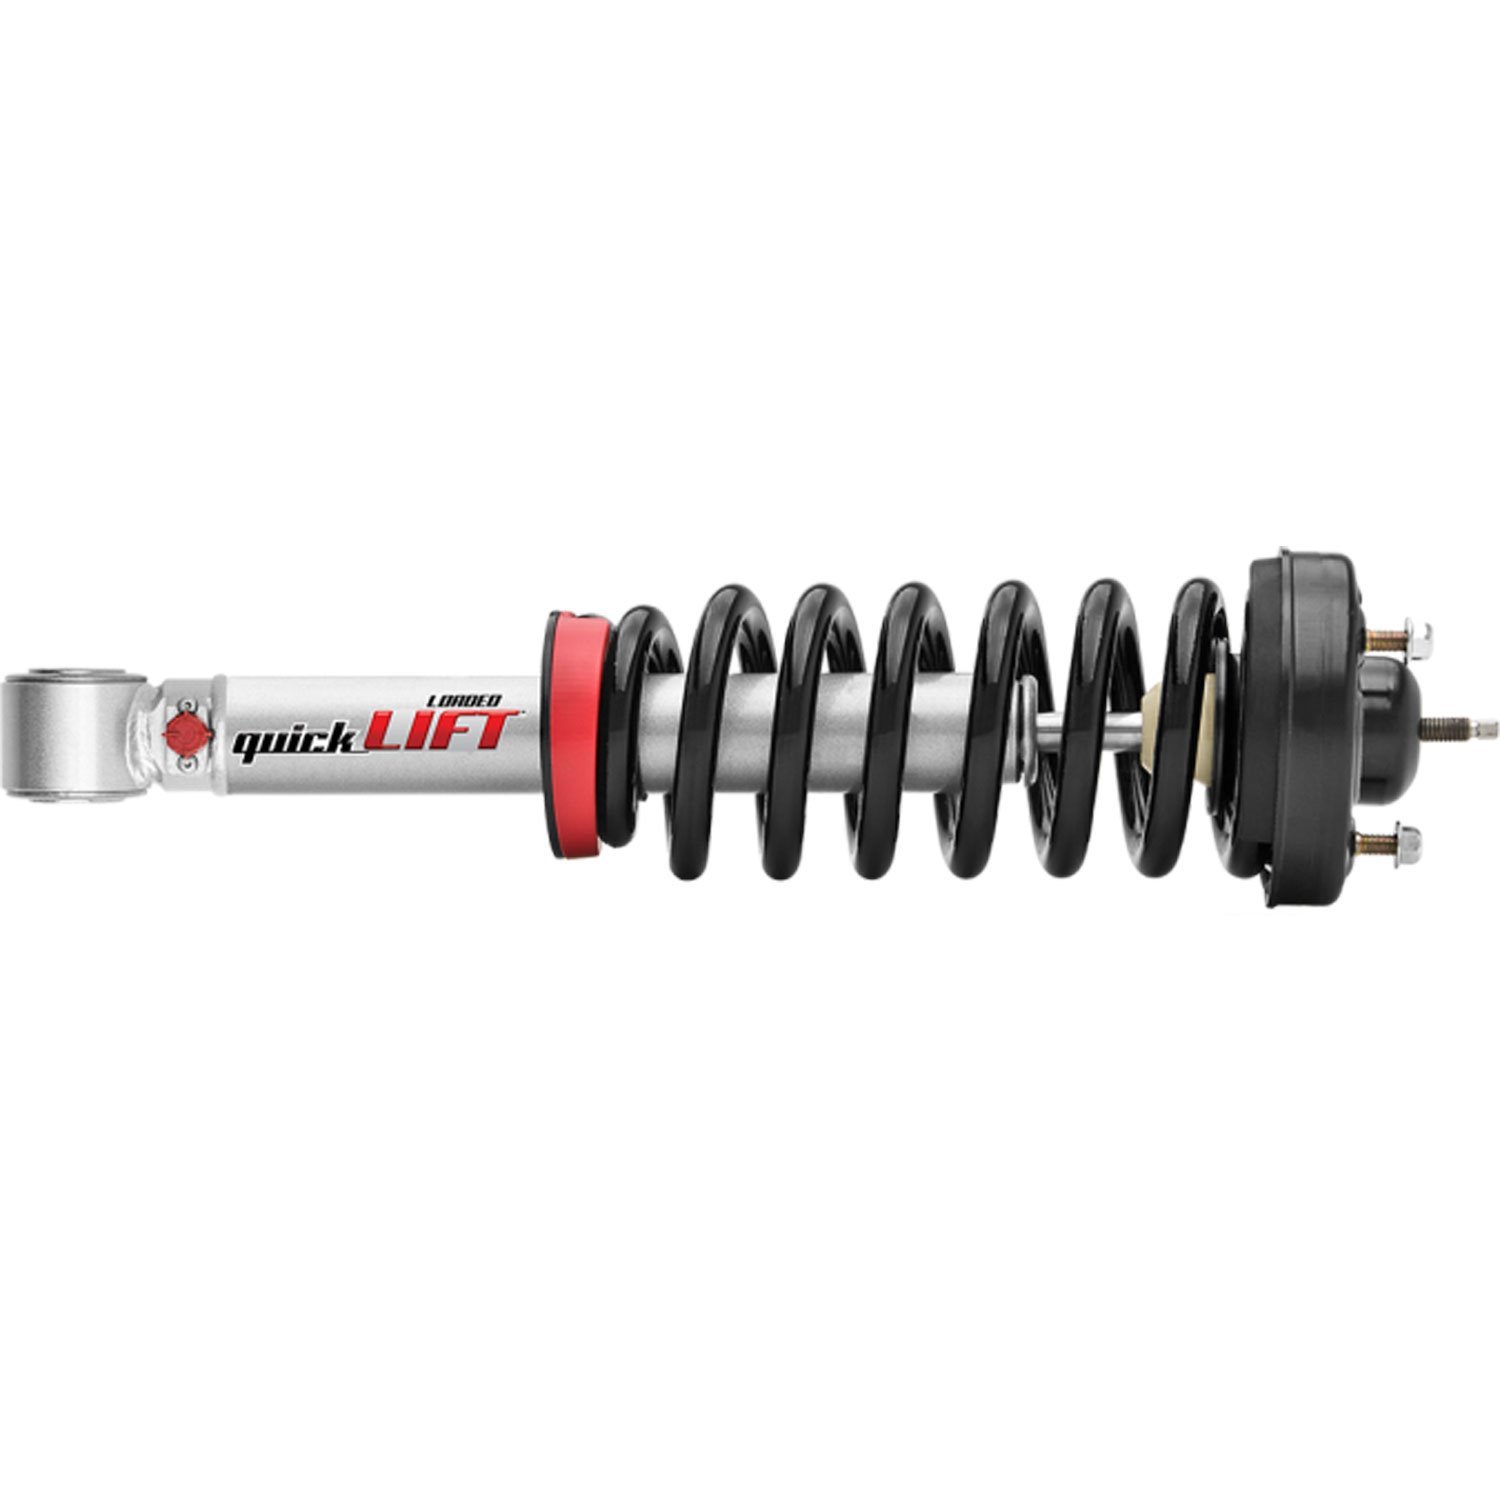 QuickLift Complete Strut Assembly Fits Toyota FJ Cruiser